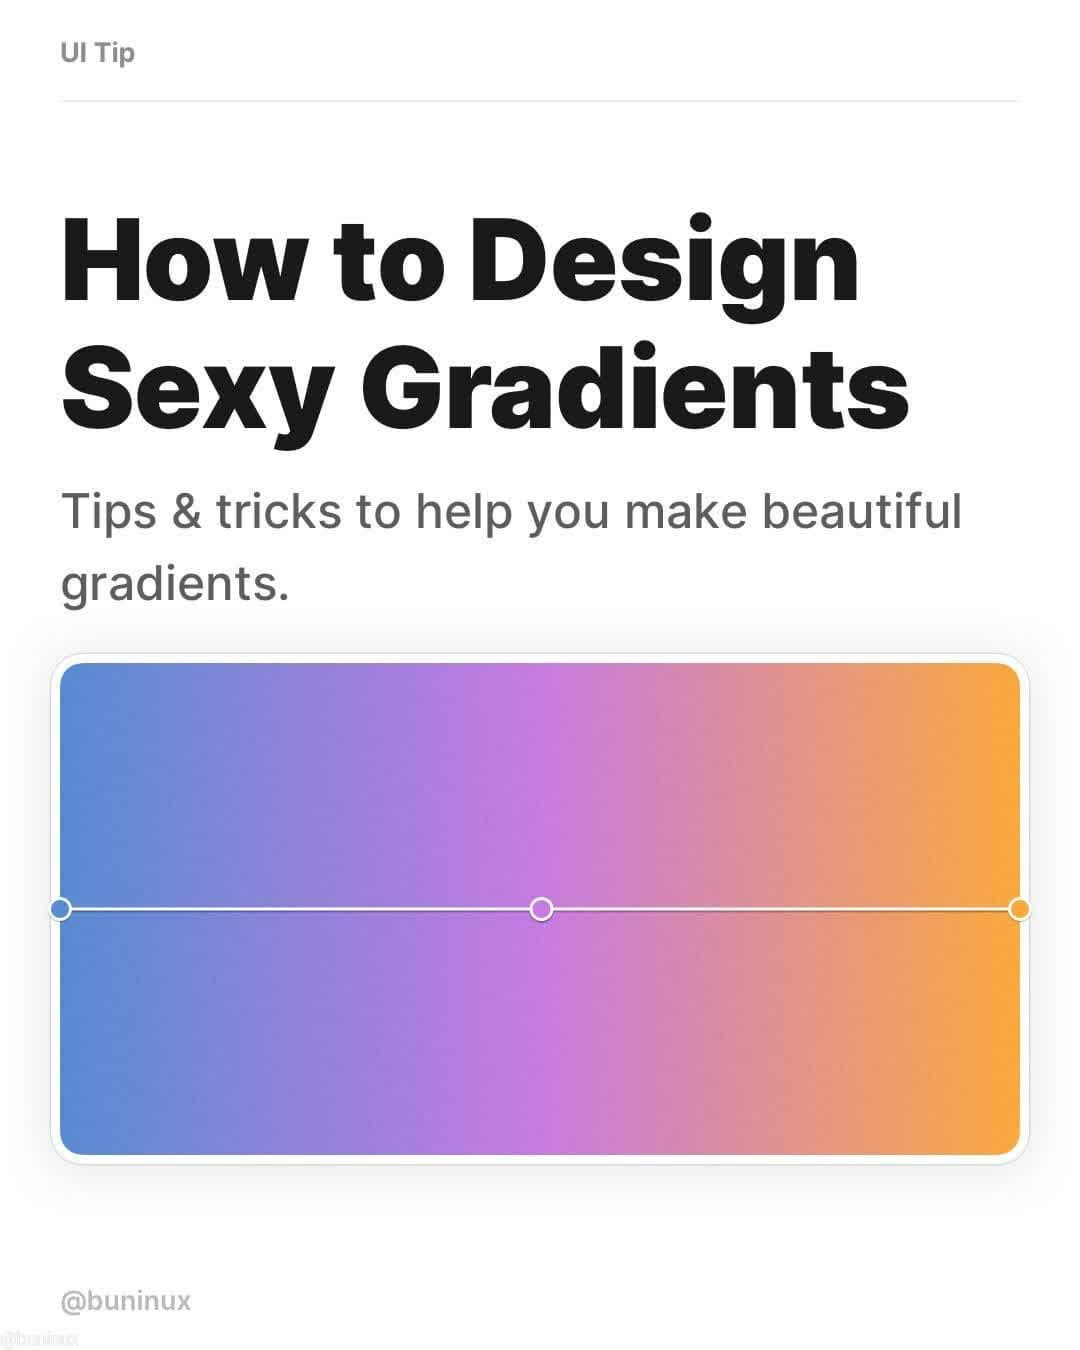 How to Design Sexy Gradients - Tips & tricks to help you make beautiful gradients